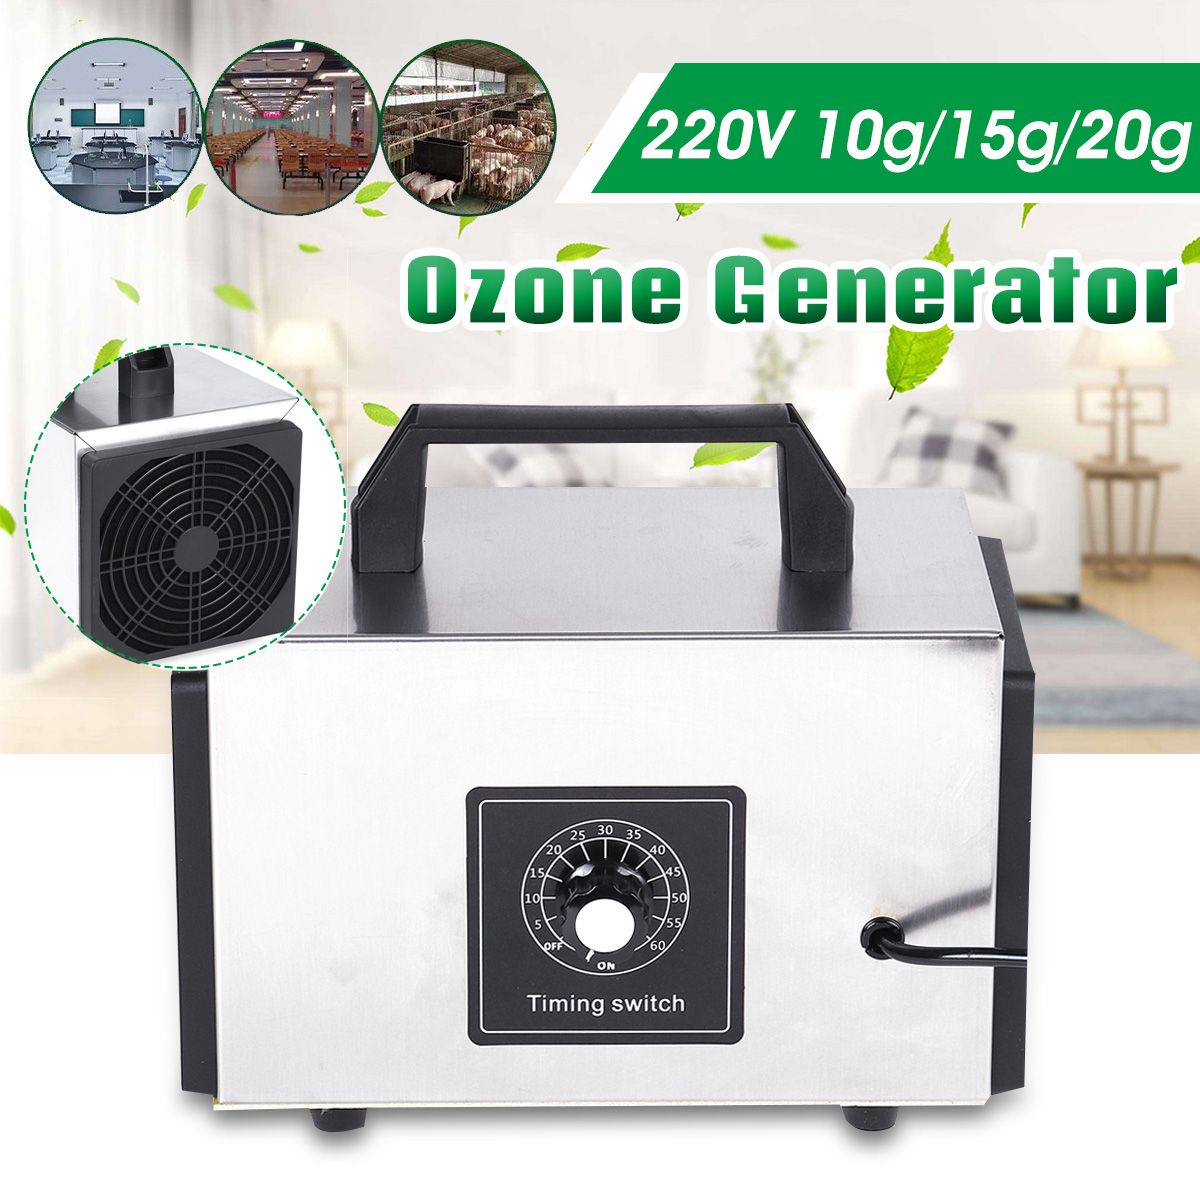 220V-10g15g20g-Ozone-Generator-Air-Sterilizer-Air-Purifier-Odor-Remover-Home-Indoor-1713529